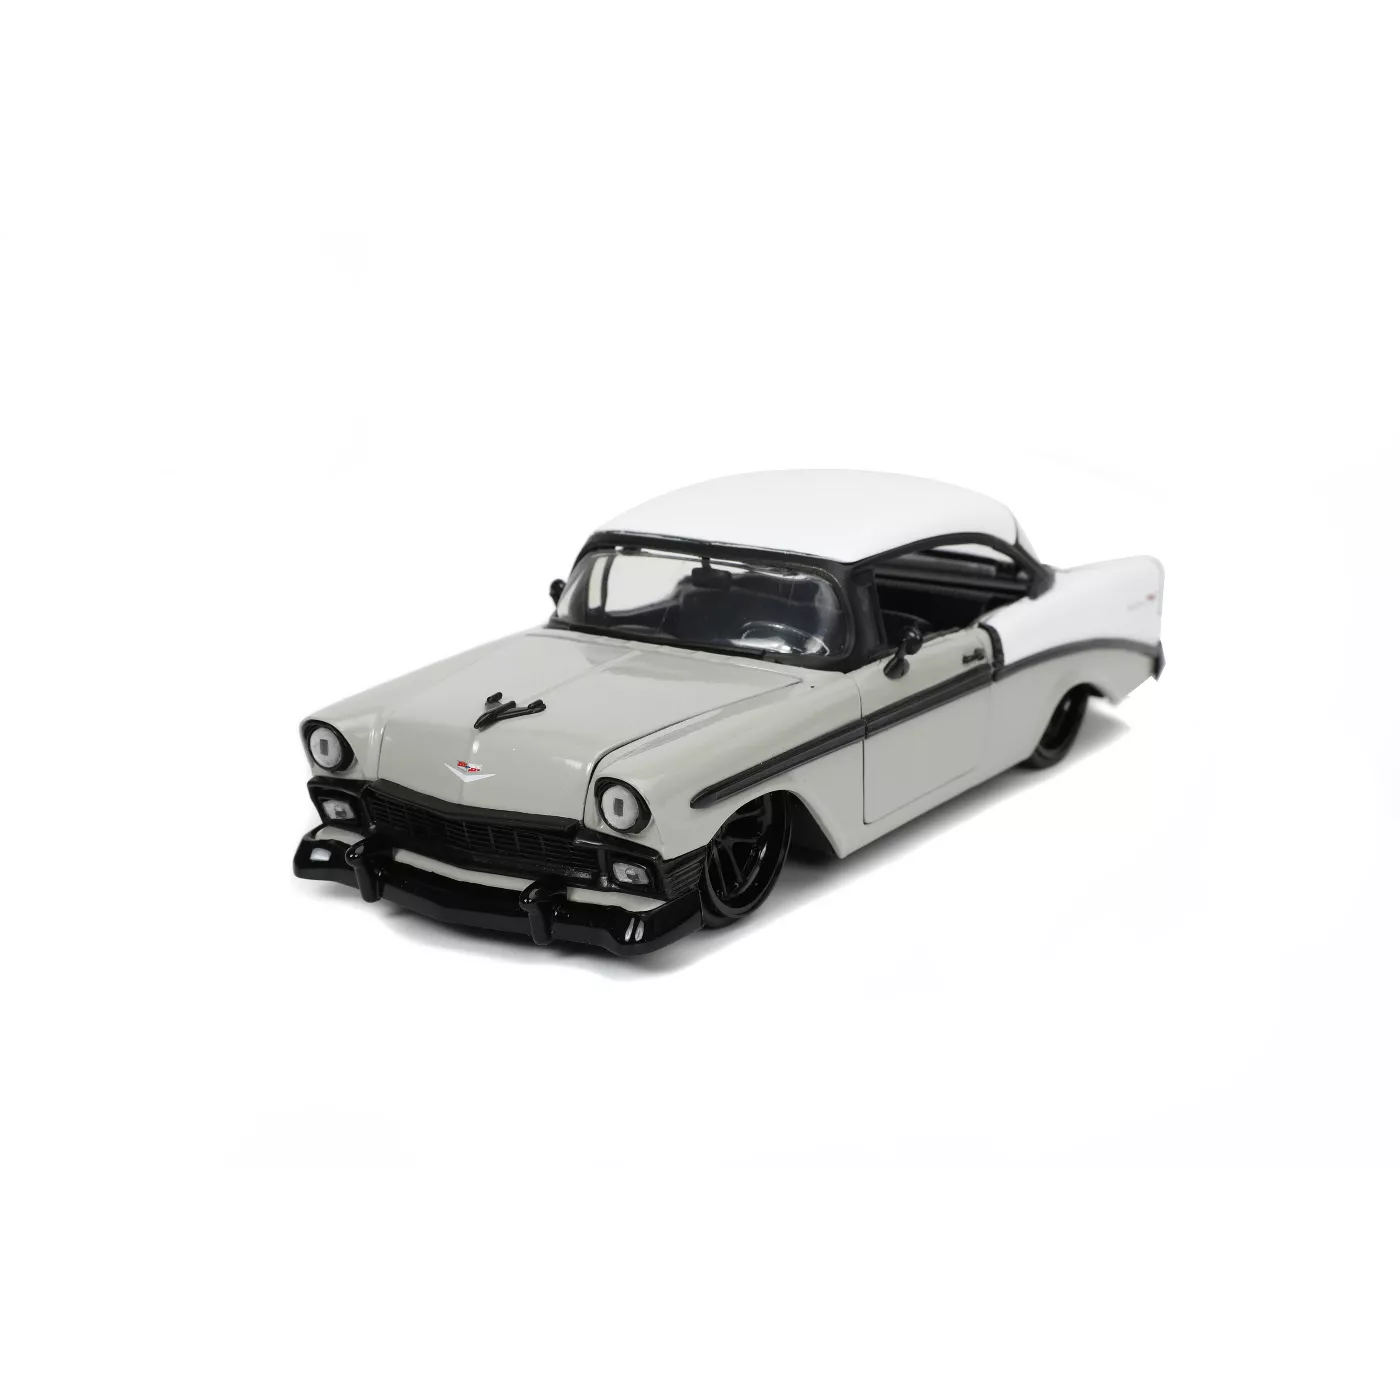 Big Time Muscle 1956 Chevy Bel Air Hard Top 1:24 Scale Die-Cast Vehicle - Gray - image 1 of 5